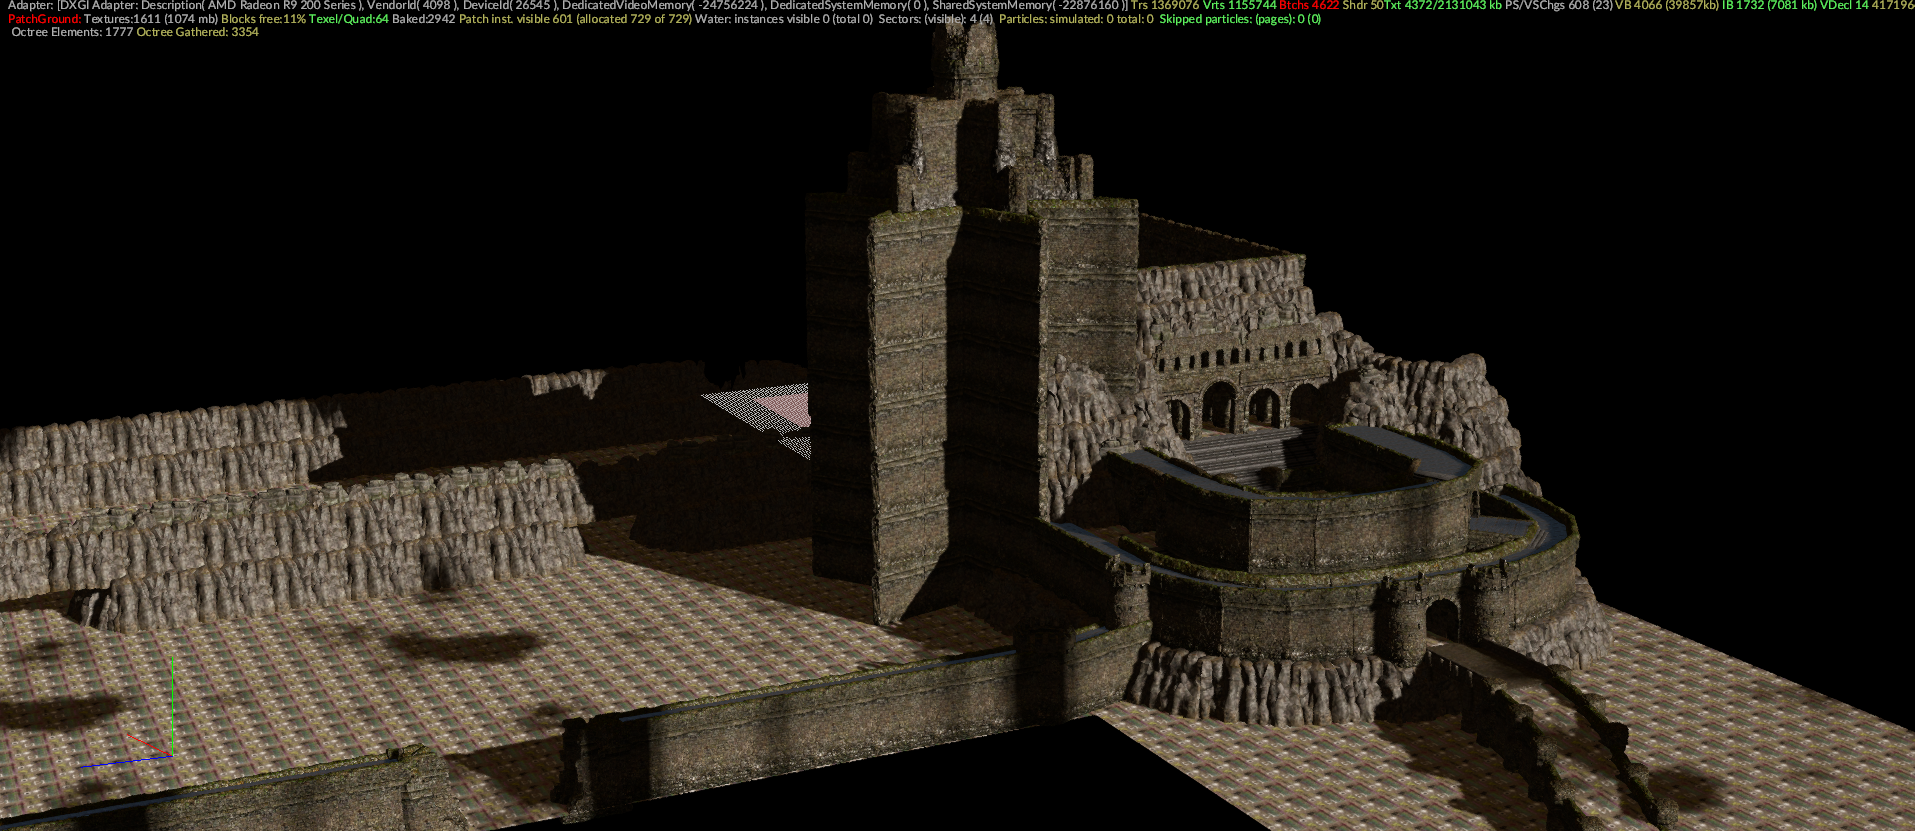 Creating custom assets and objects of Helms Deep map/episode (fortress) and size scaling